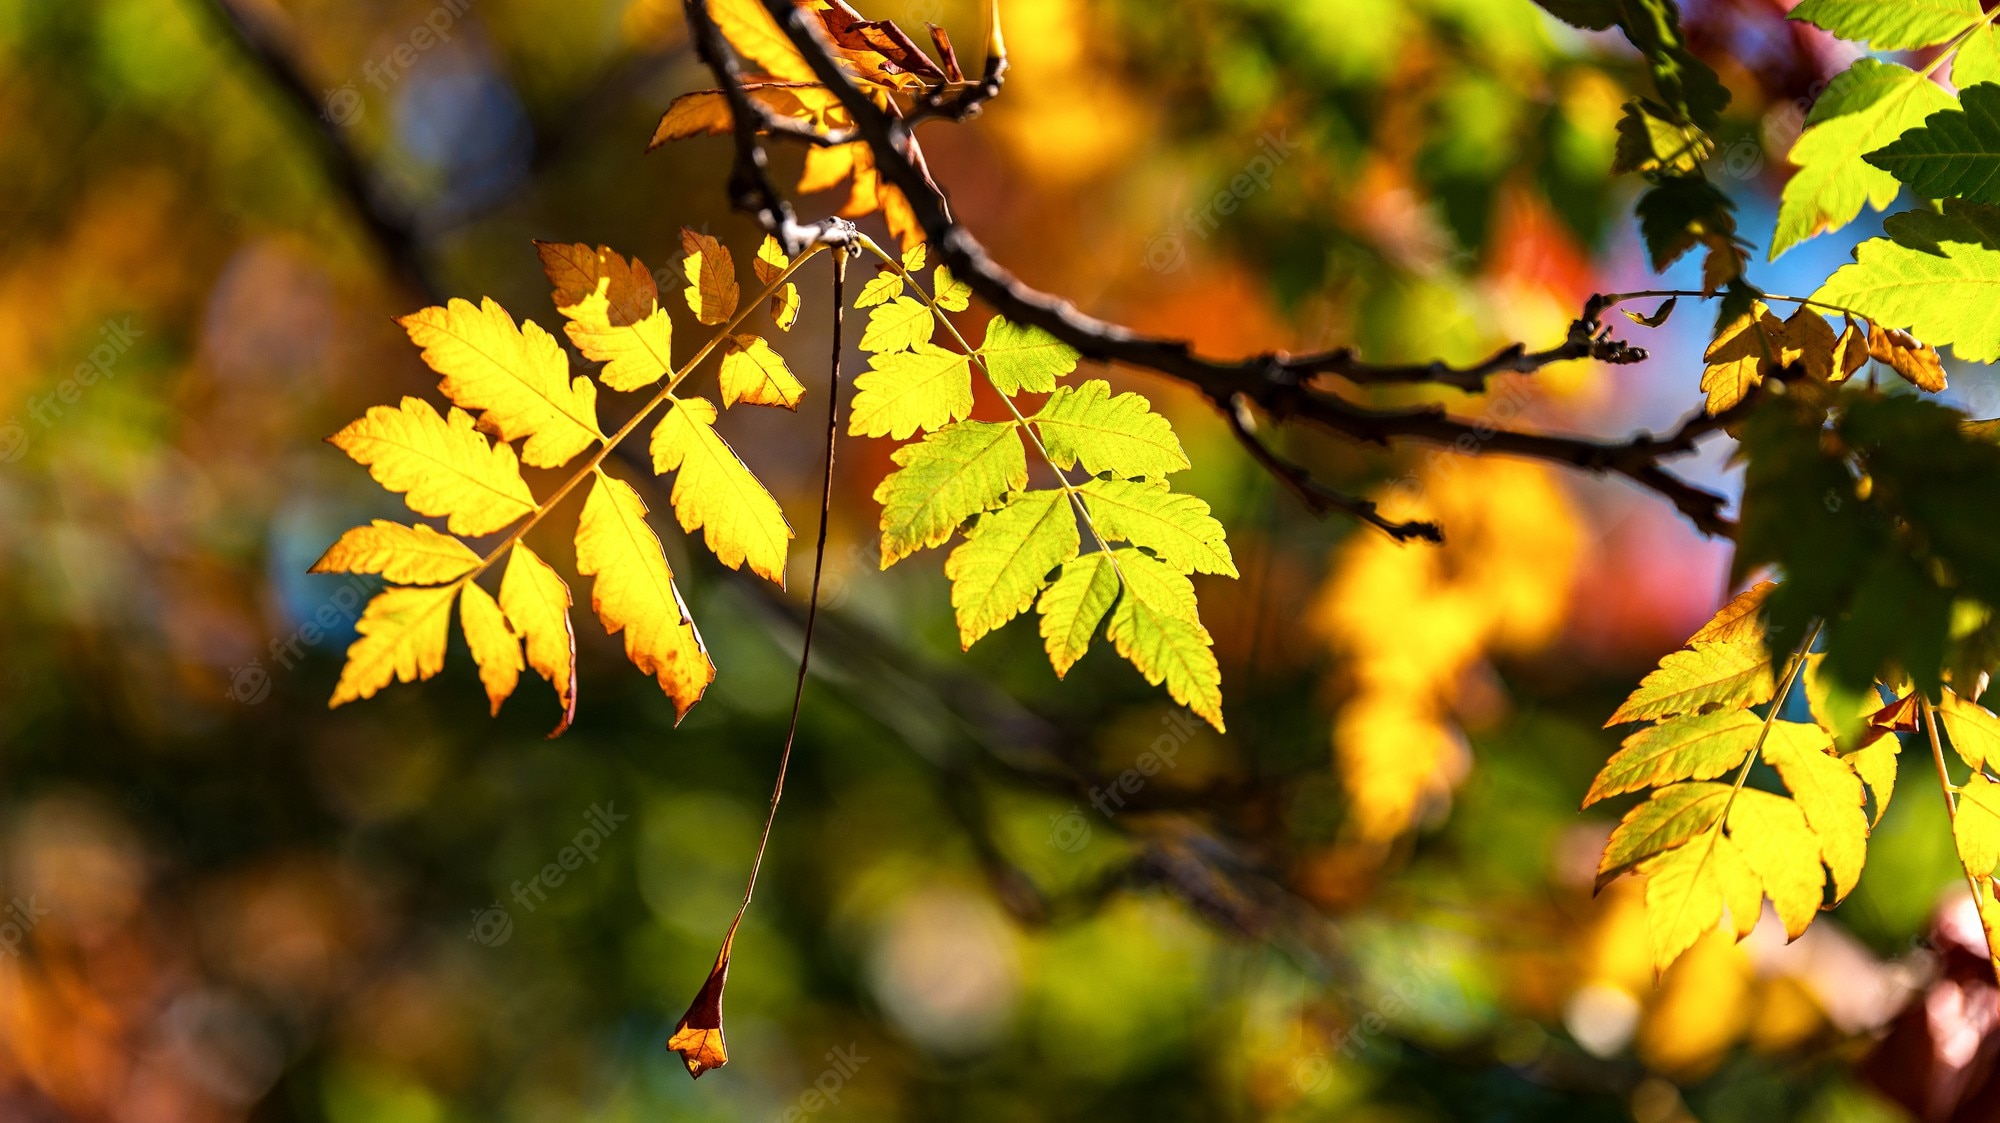 Premium Photo. Wallpaper of autumn leaves on tree branches on a warm autumn sunny day with a shallow depth of field